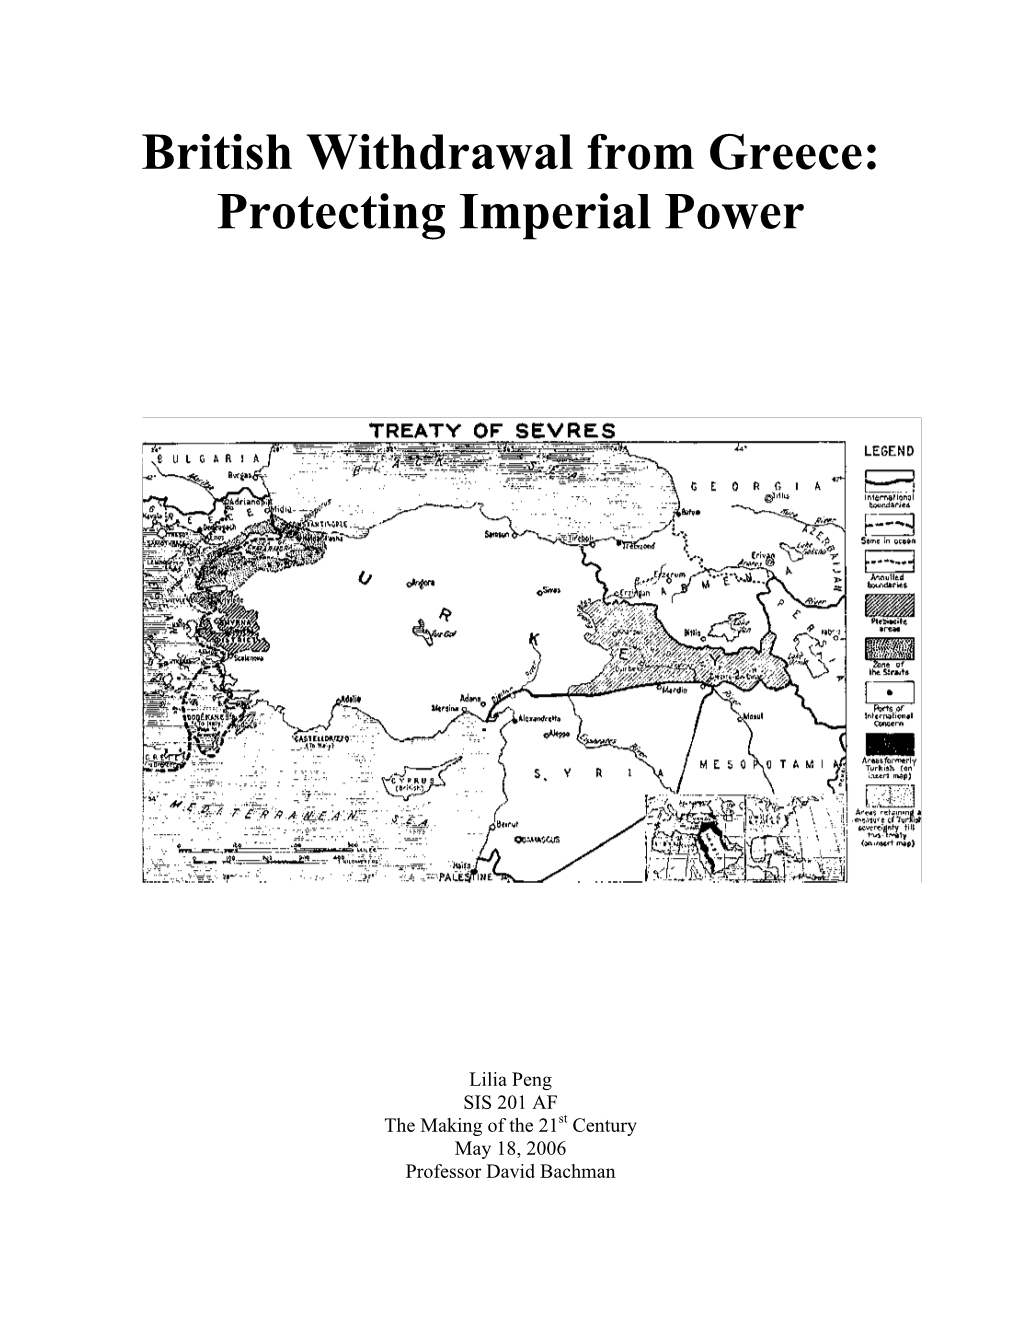 British Withdrawal from Greece: Protecting Imperial Power